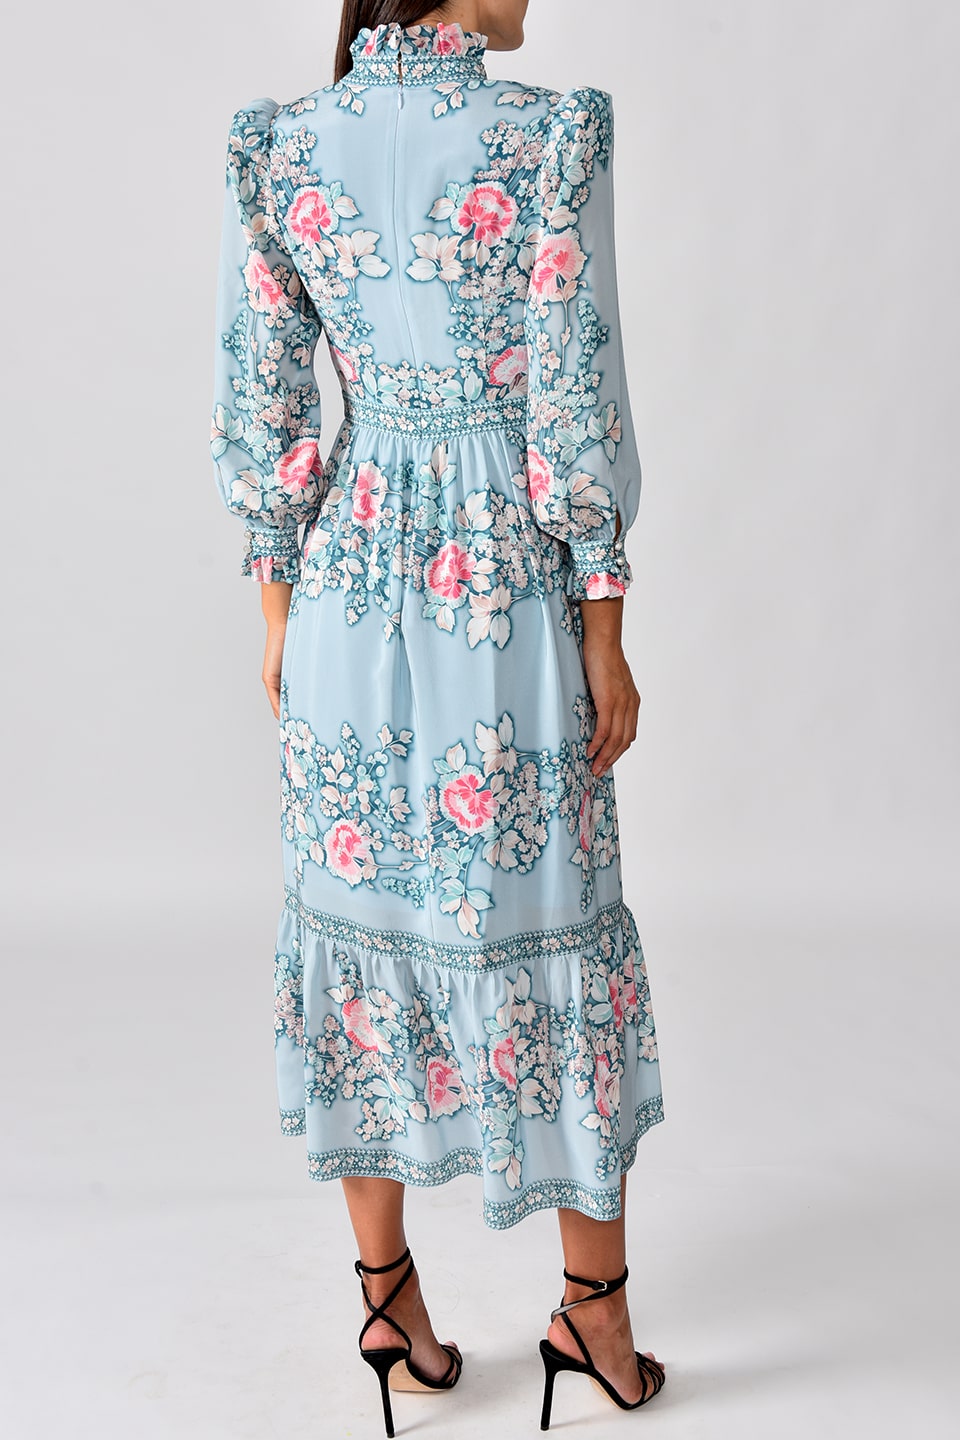 Thumbnail for Product gallery 2, Model wears silk midi dress in a pale blue floral print from stylist Vilshenko, posing from behind